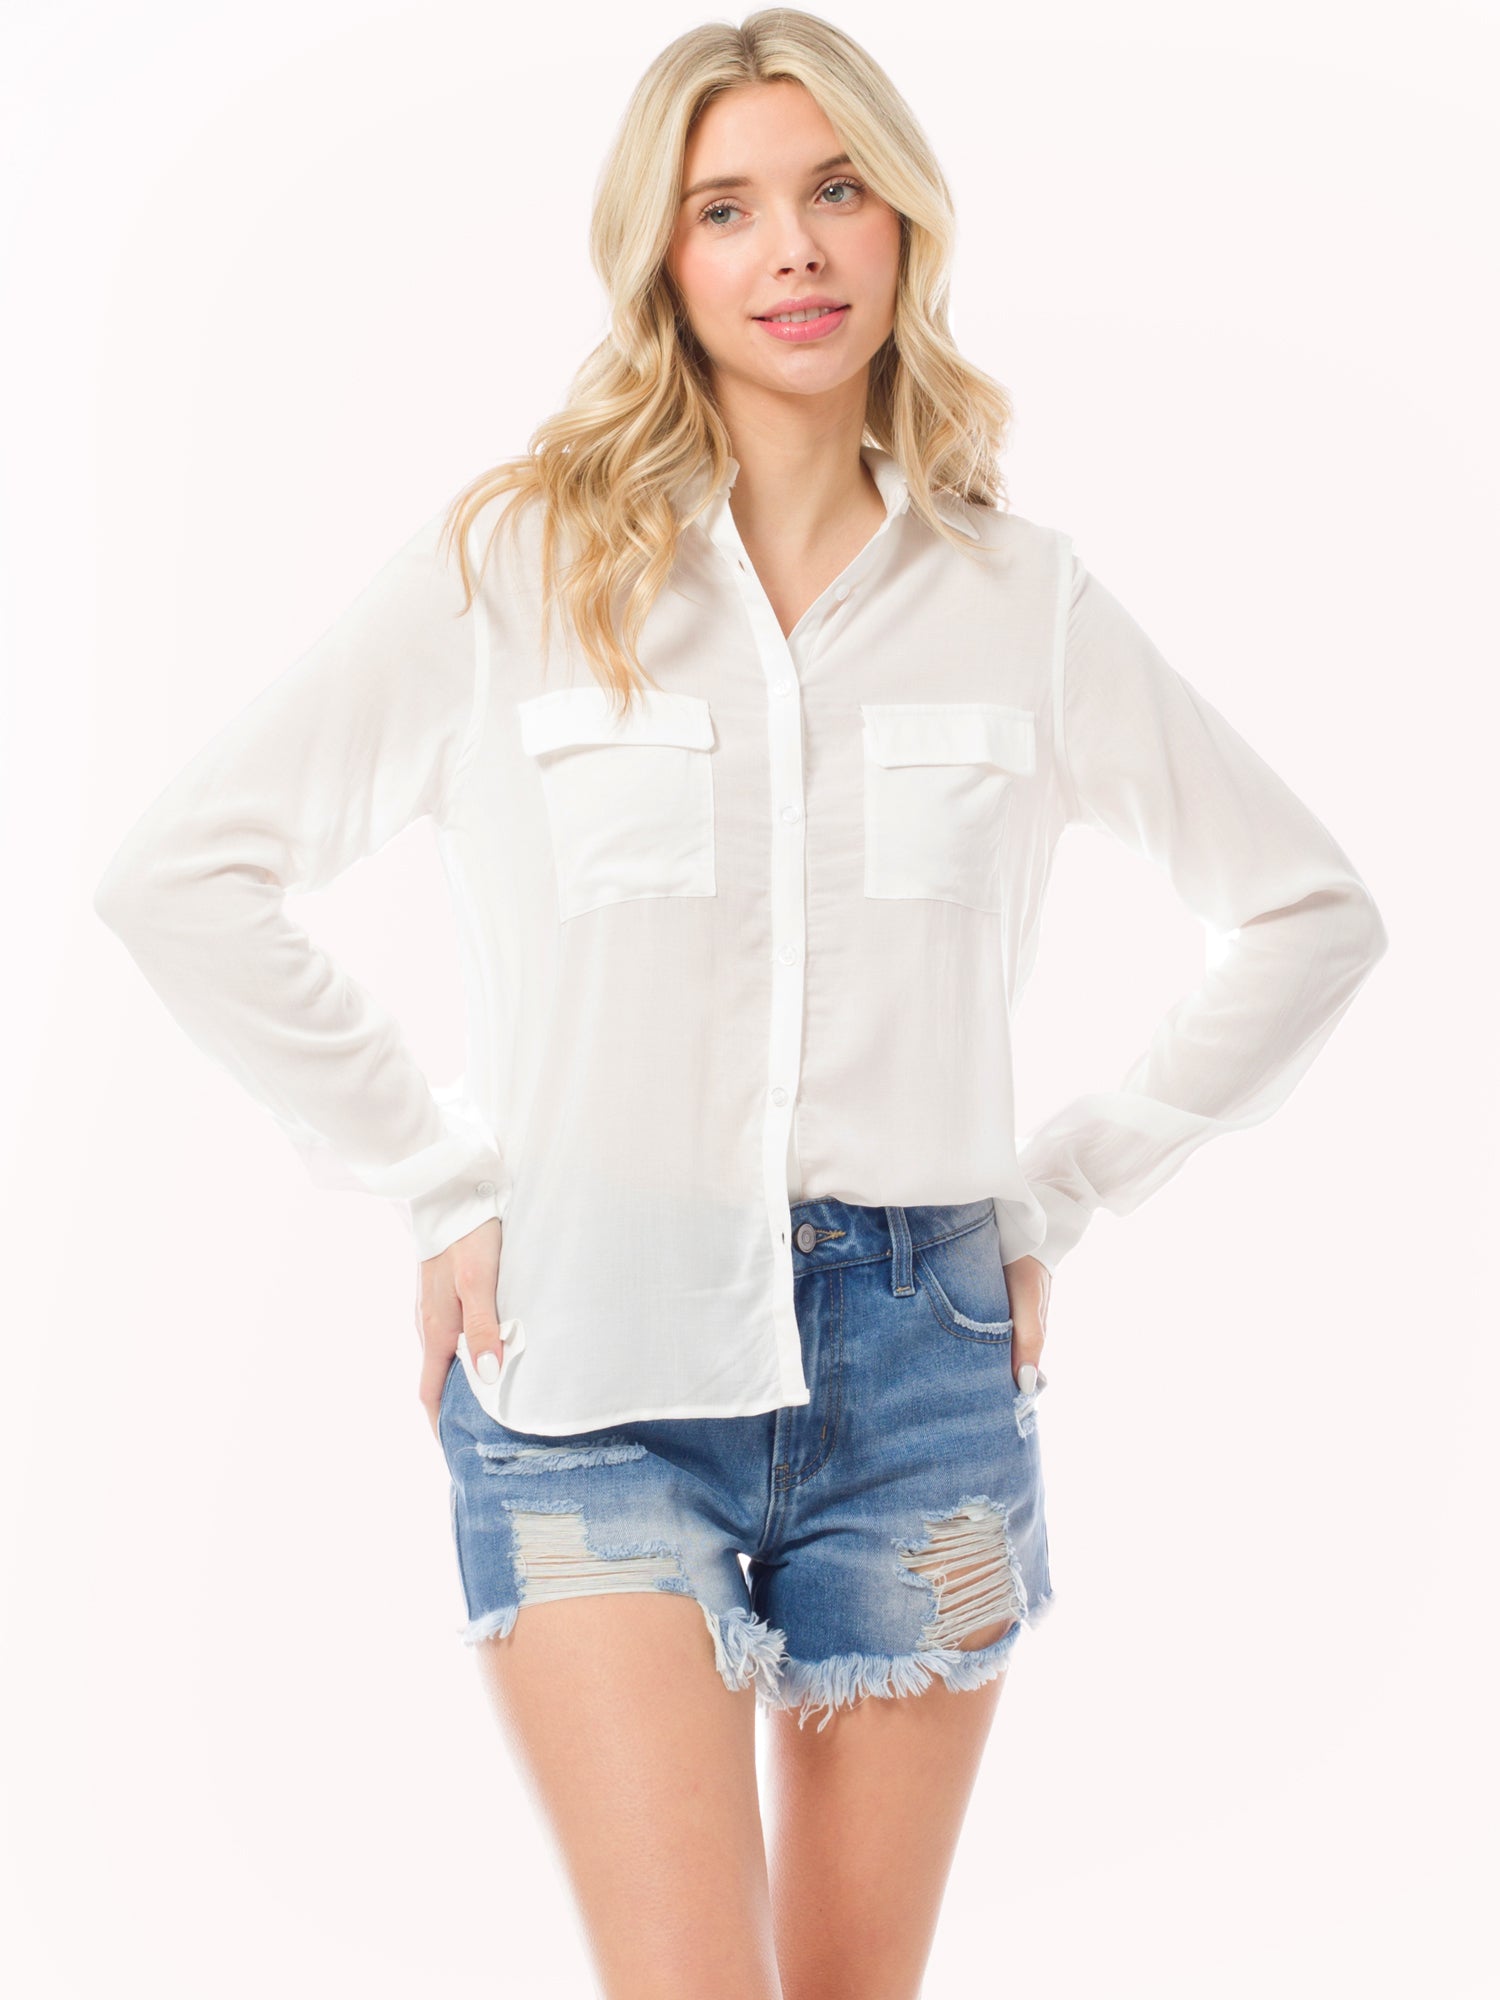 Casual Long Sleeve Button-Down Shirt Collared Blouse Top